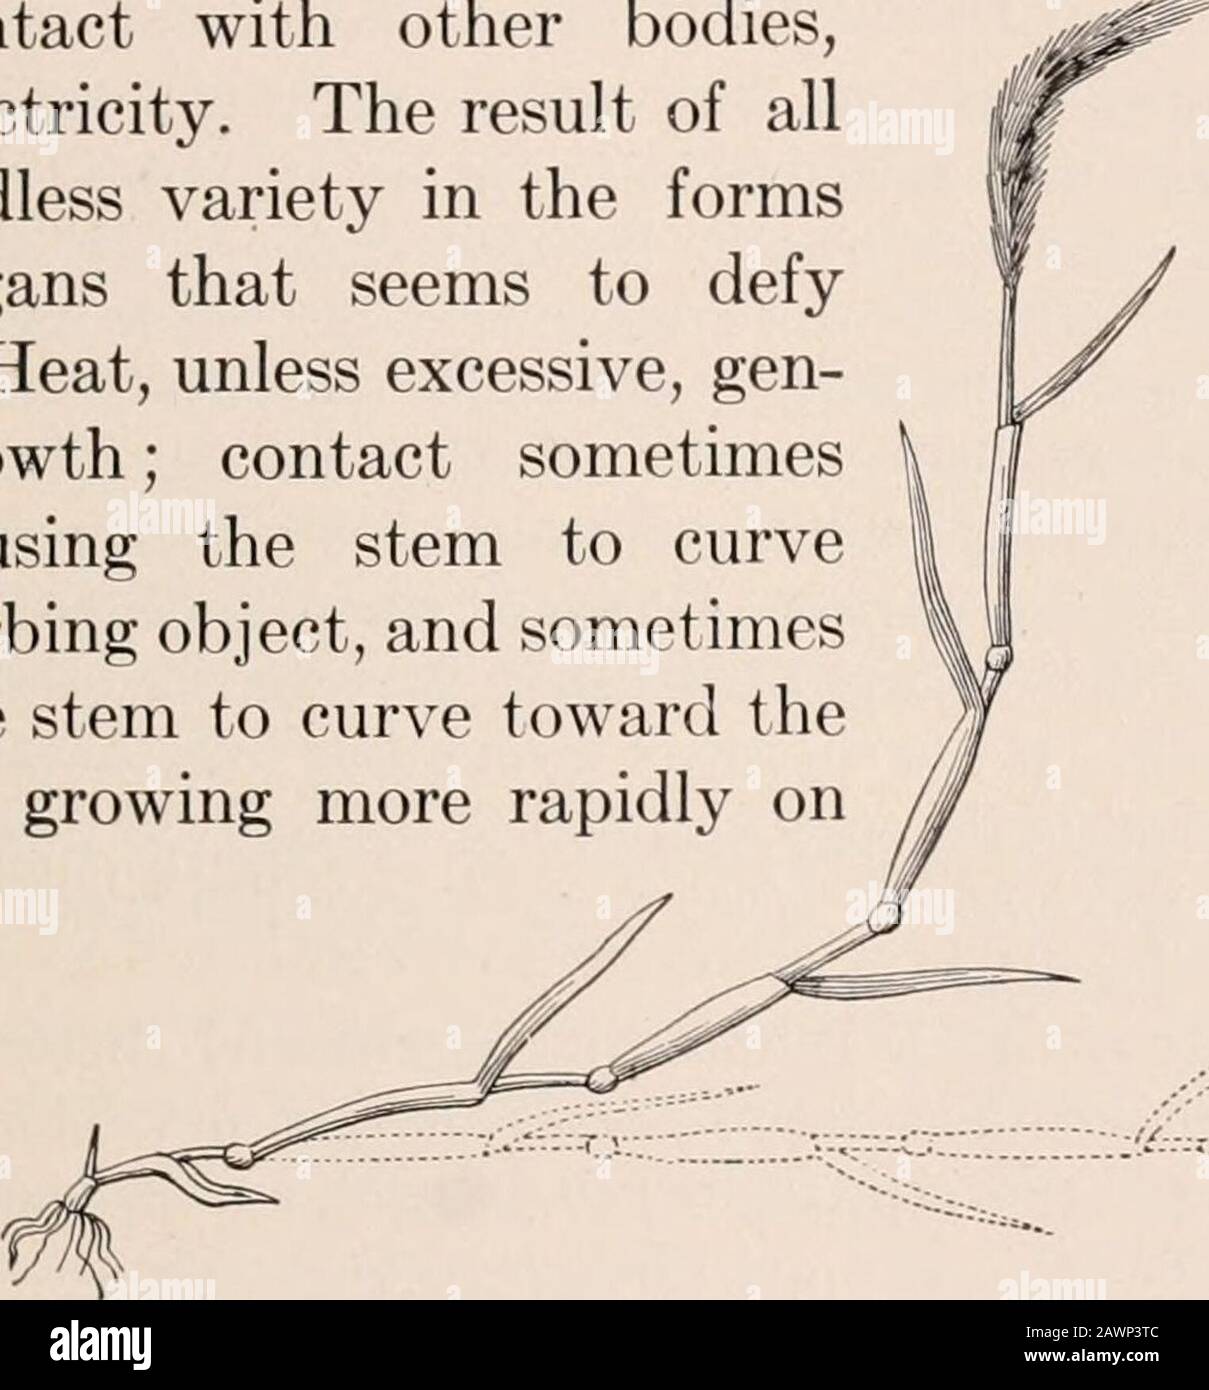 A practical course in botany : with especial reference to its bearings on agriculture, economics, and sanitation . ,without showing a tendency to grow downward. We maythen conclude th;it geotropism is a reaction to gravity. 53. Geotropism an active force. — It must be noted,however, that the force here alluded to is not the mere me- GERMINATION AND GROWTH 51 chanical effect of gravity, due to weight of parts, as when thebough of a fruit tree is bent under the load of its crop, buta certain stimulus to which the plant reacts by a spontaneousadjustment of its growing parts. In other words, geotr Stock Photo